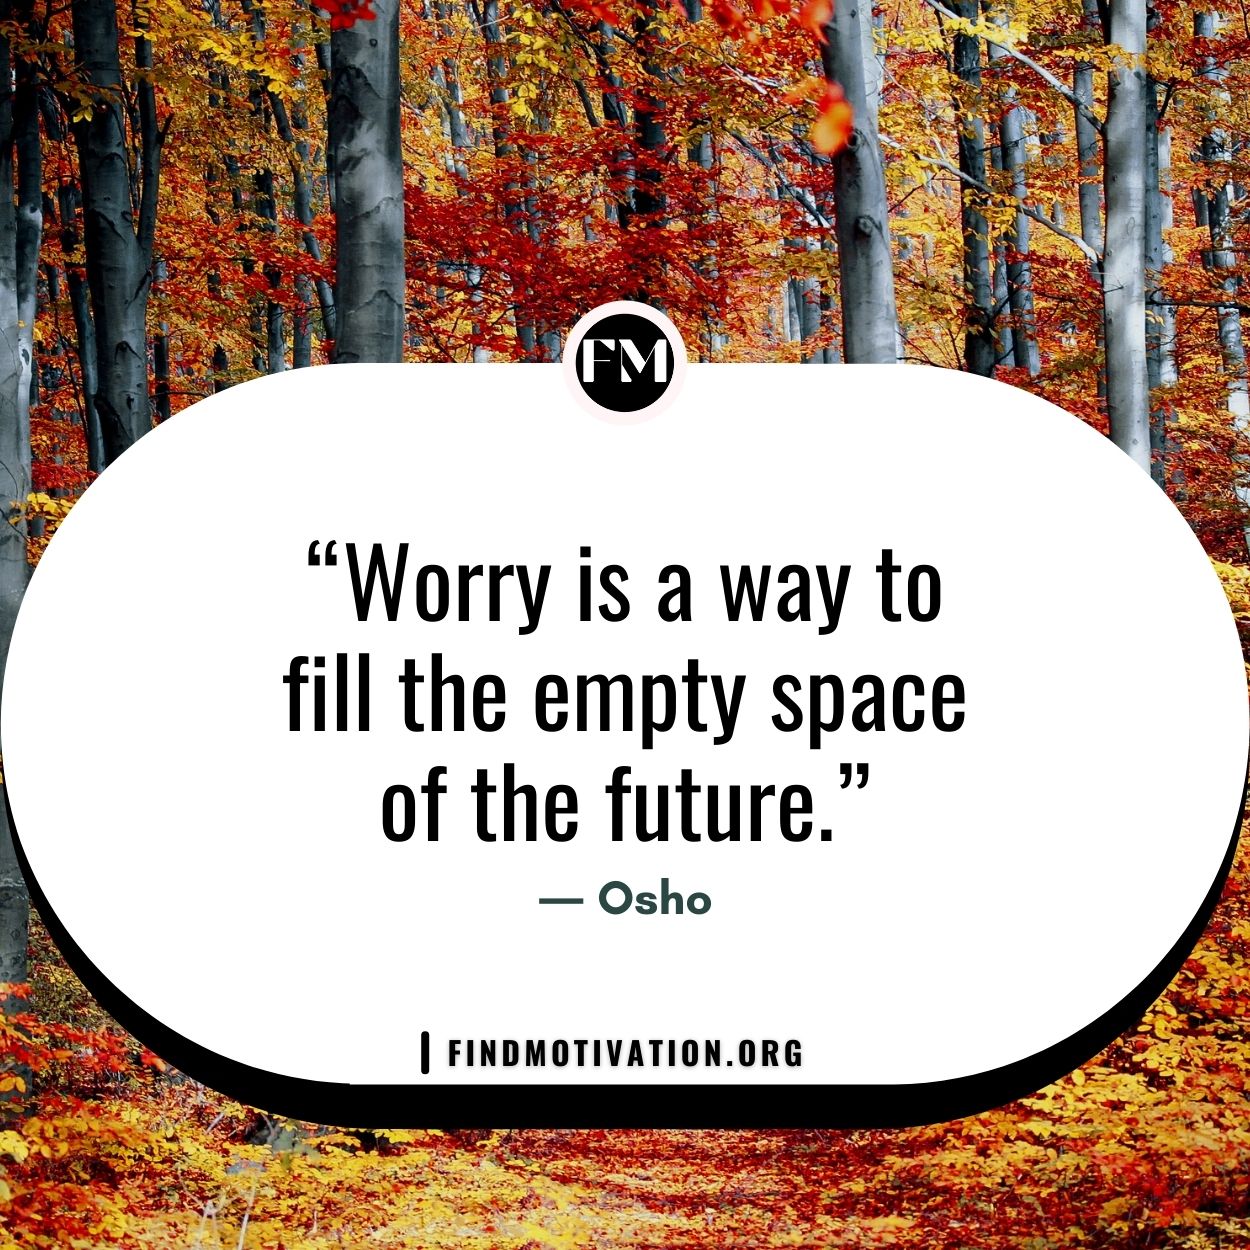 Motivational thoughts about worry to face any unexpected situations